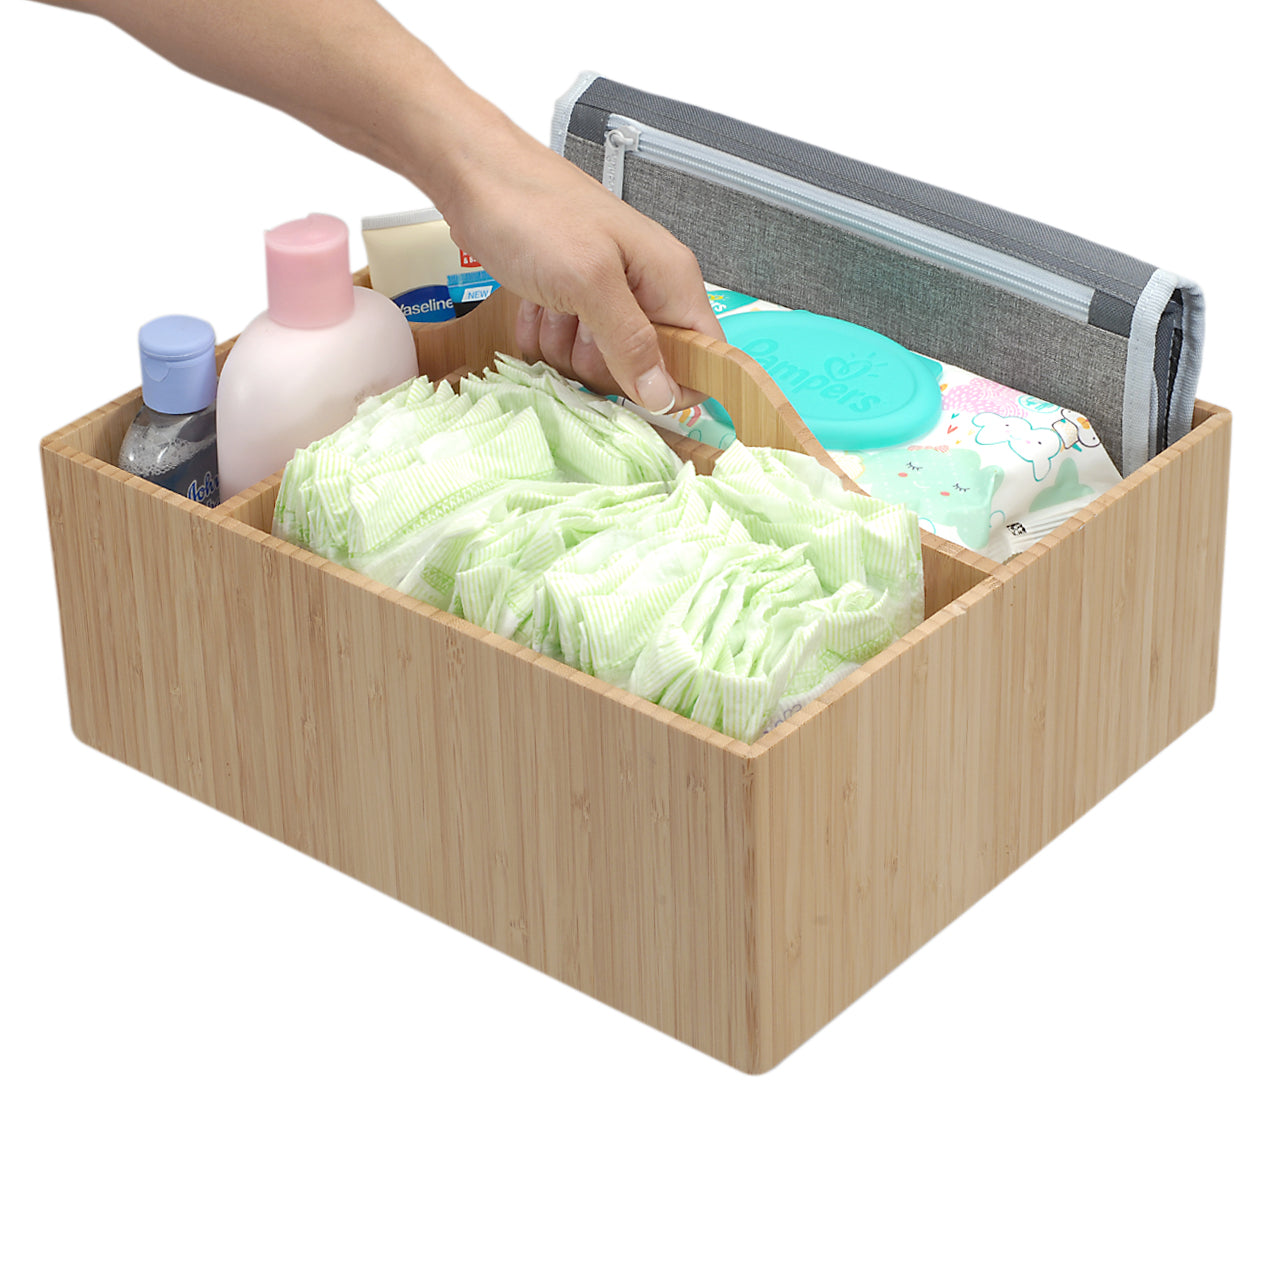 Bamboo Multi Purpose Caddy with Handle